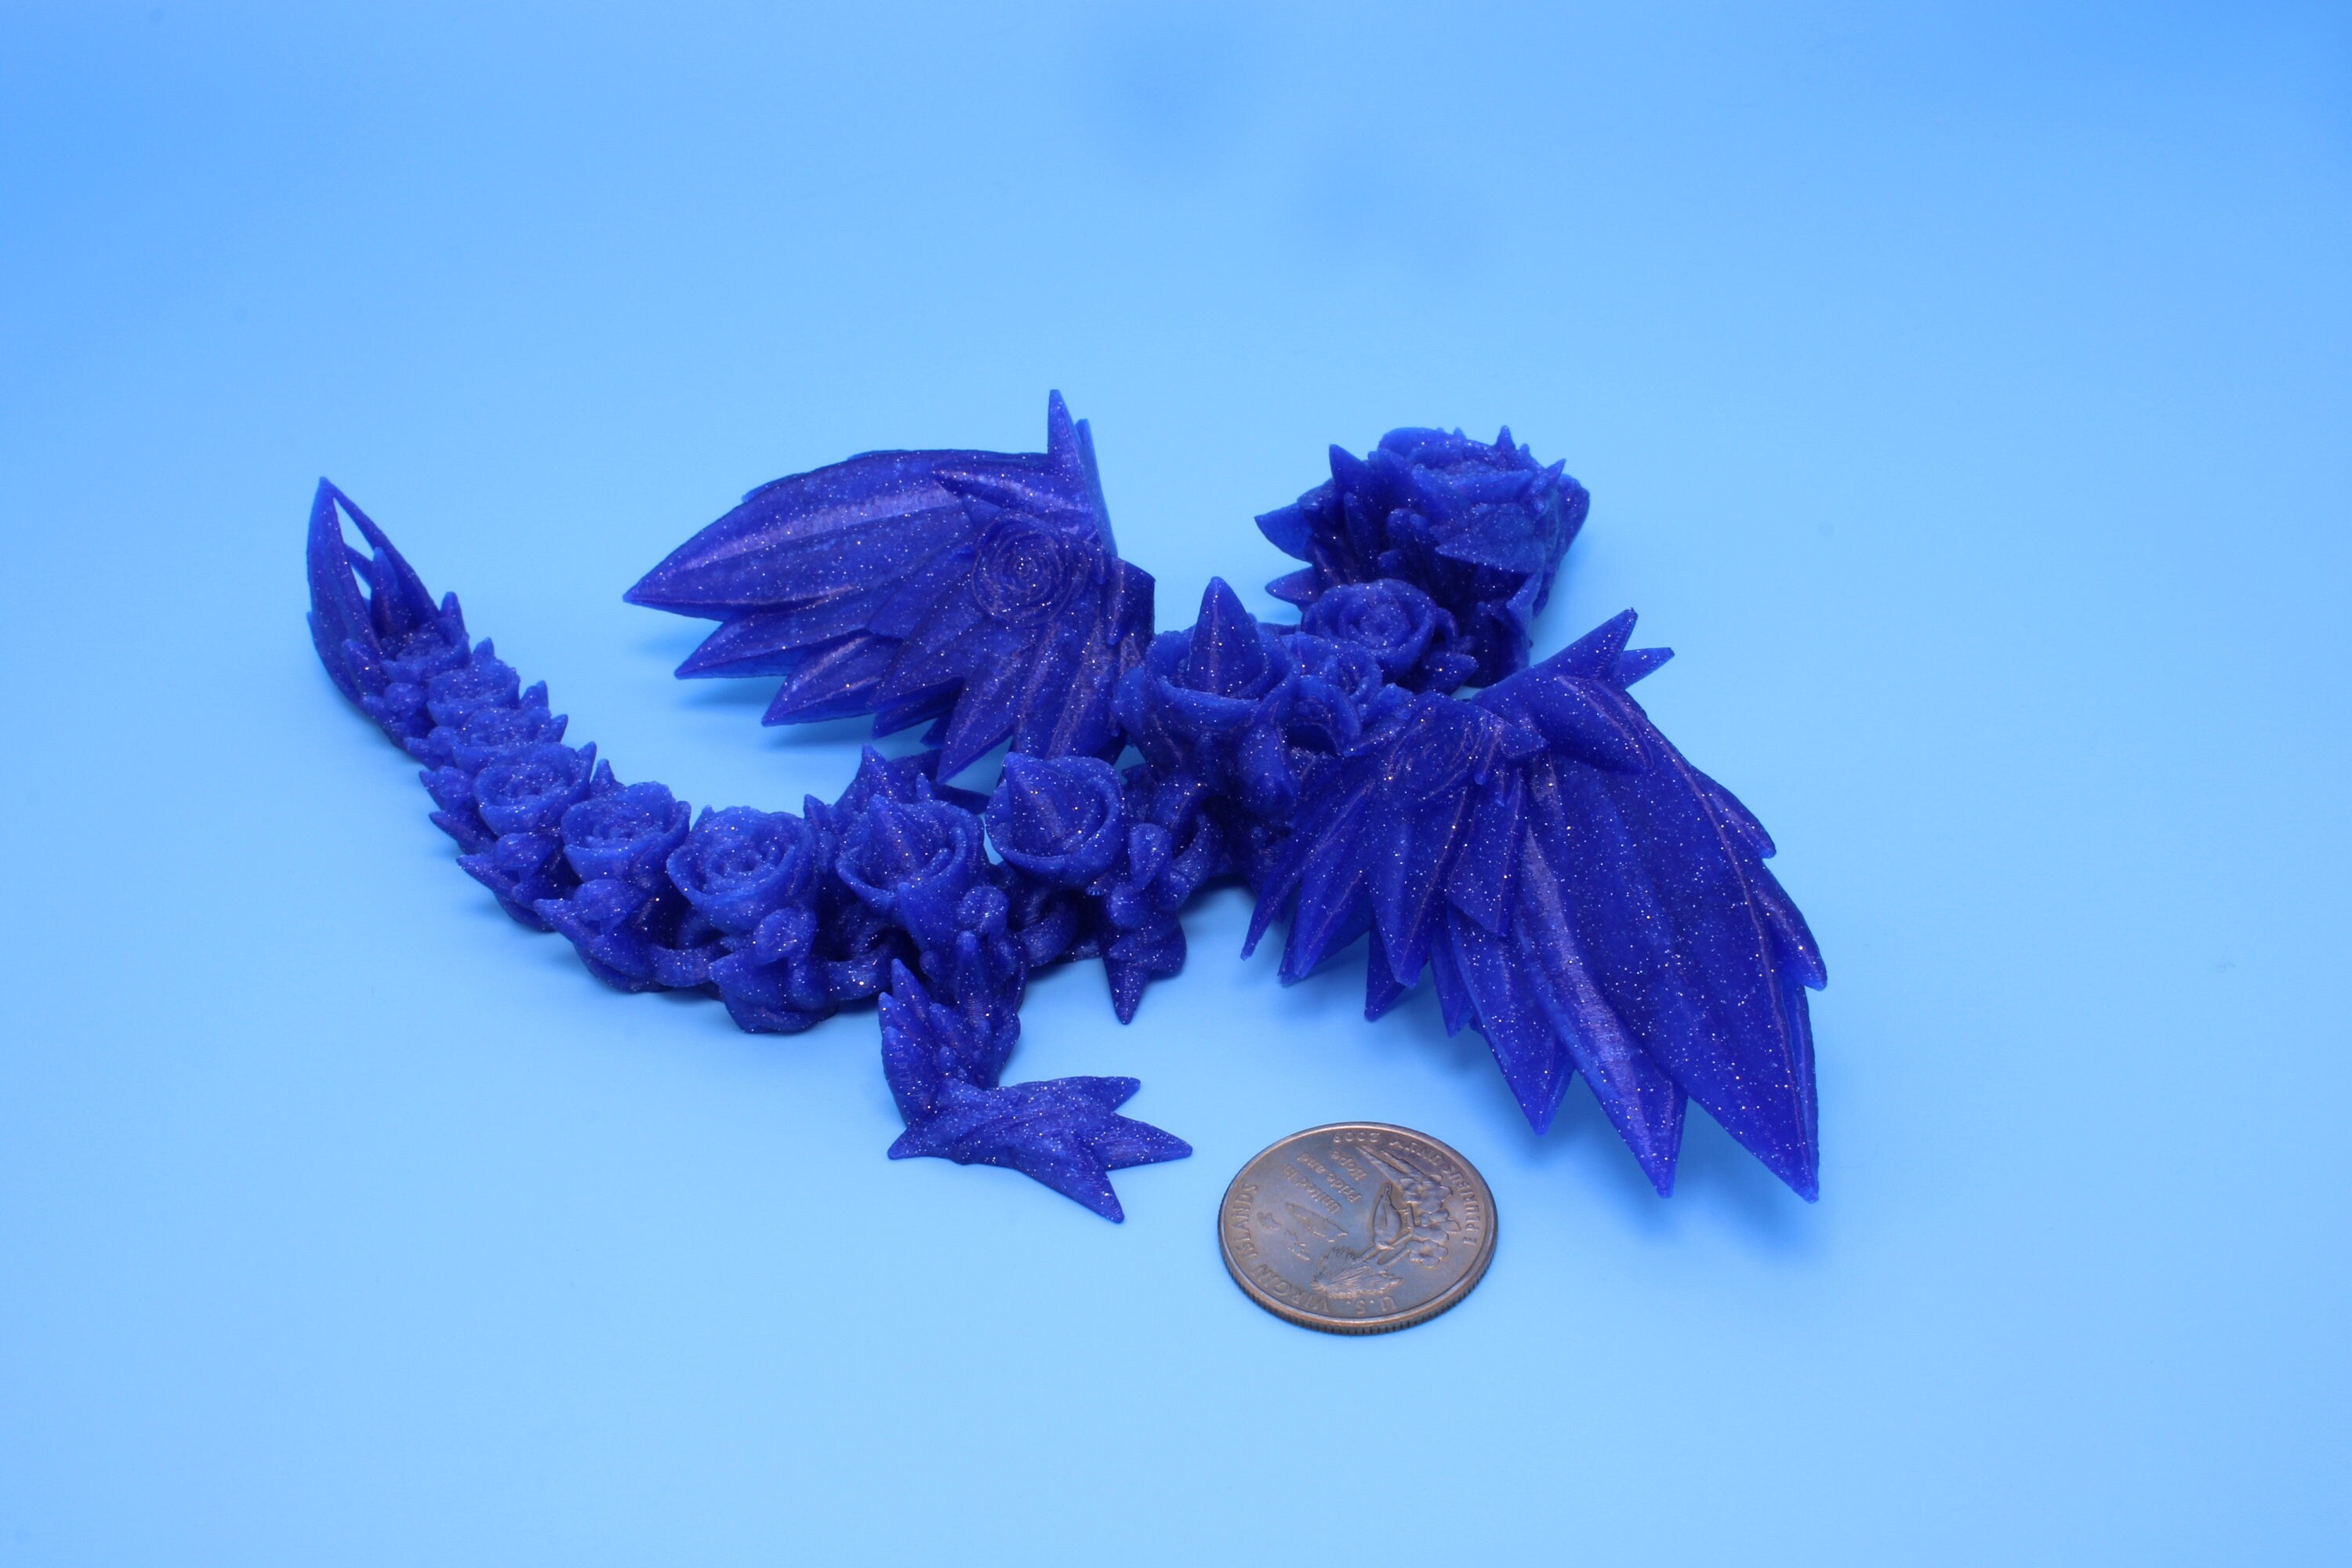 Baby Rose Wing Dragon | Blue | 3D Printed | Fidget | Flexi Toy 8.5 in. | Stress Relief Gift